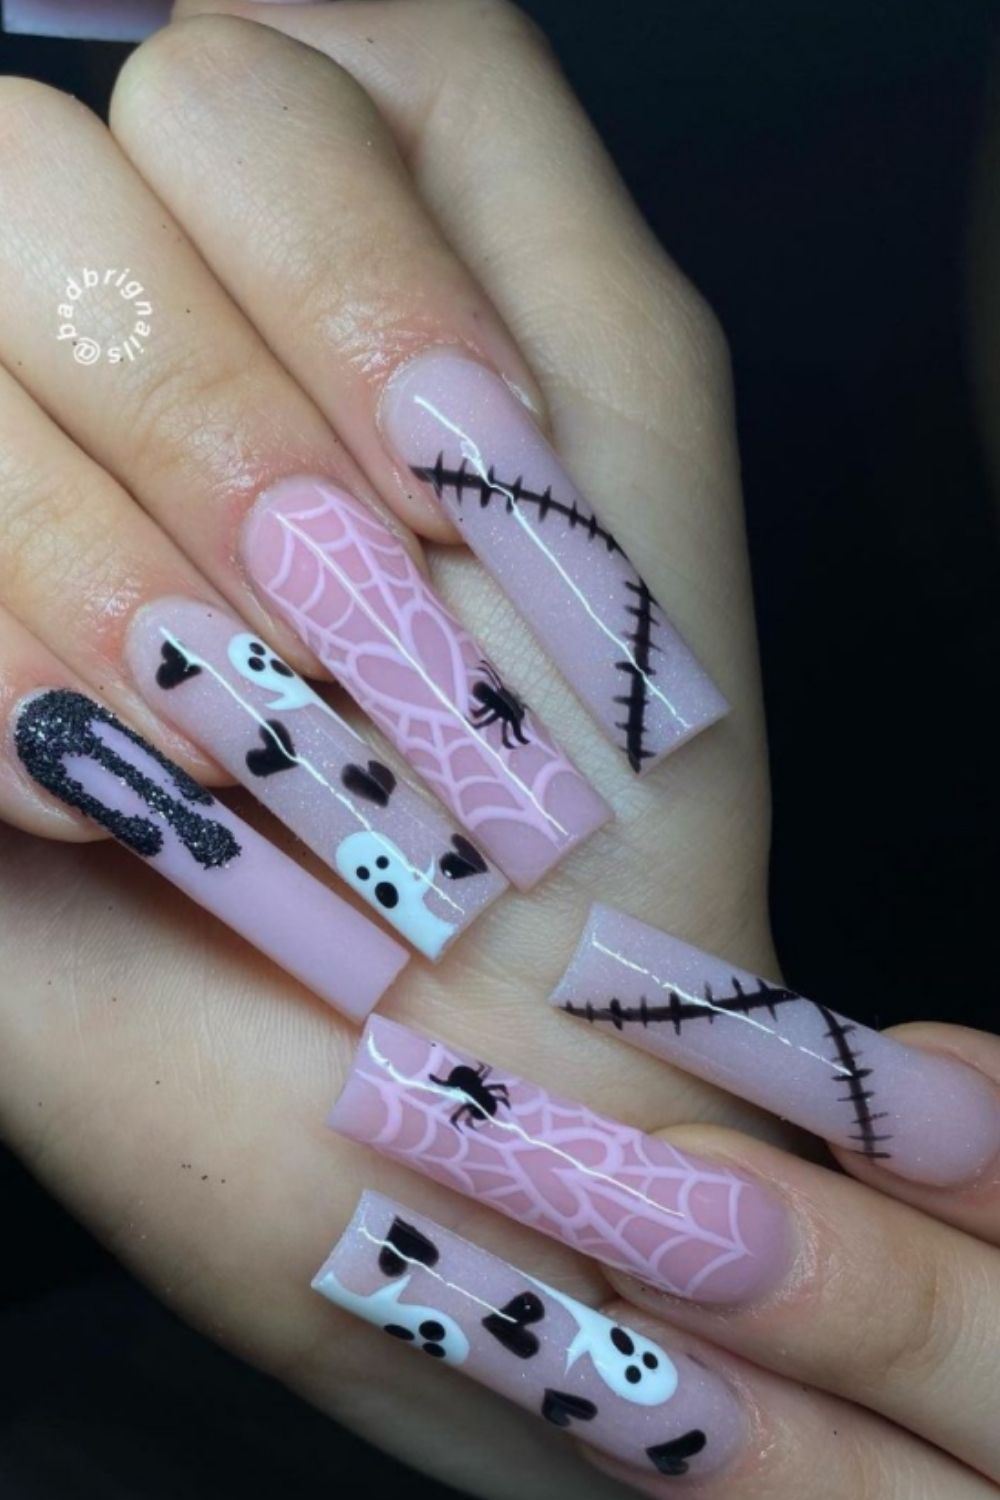 White and pink coffin nails